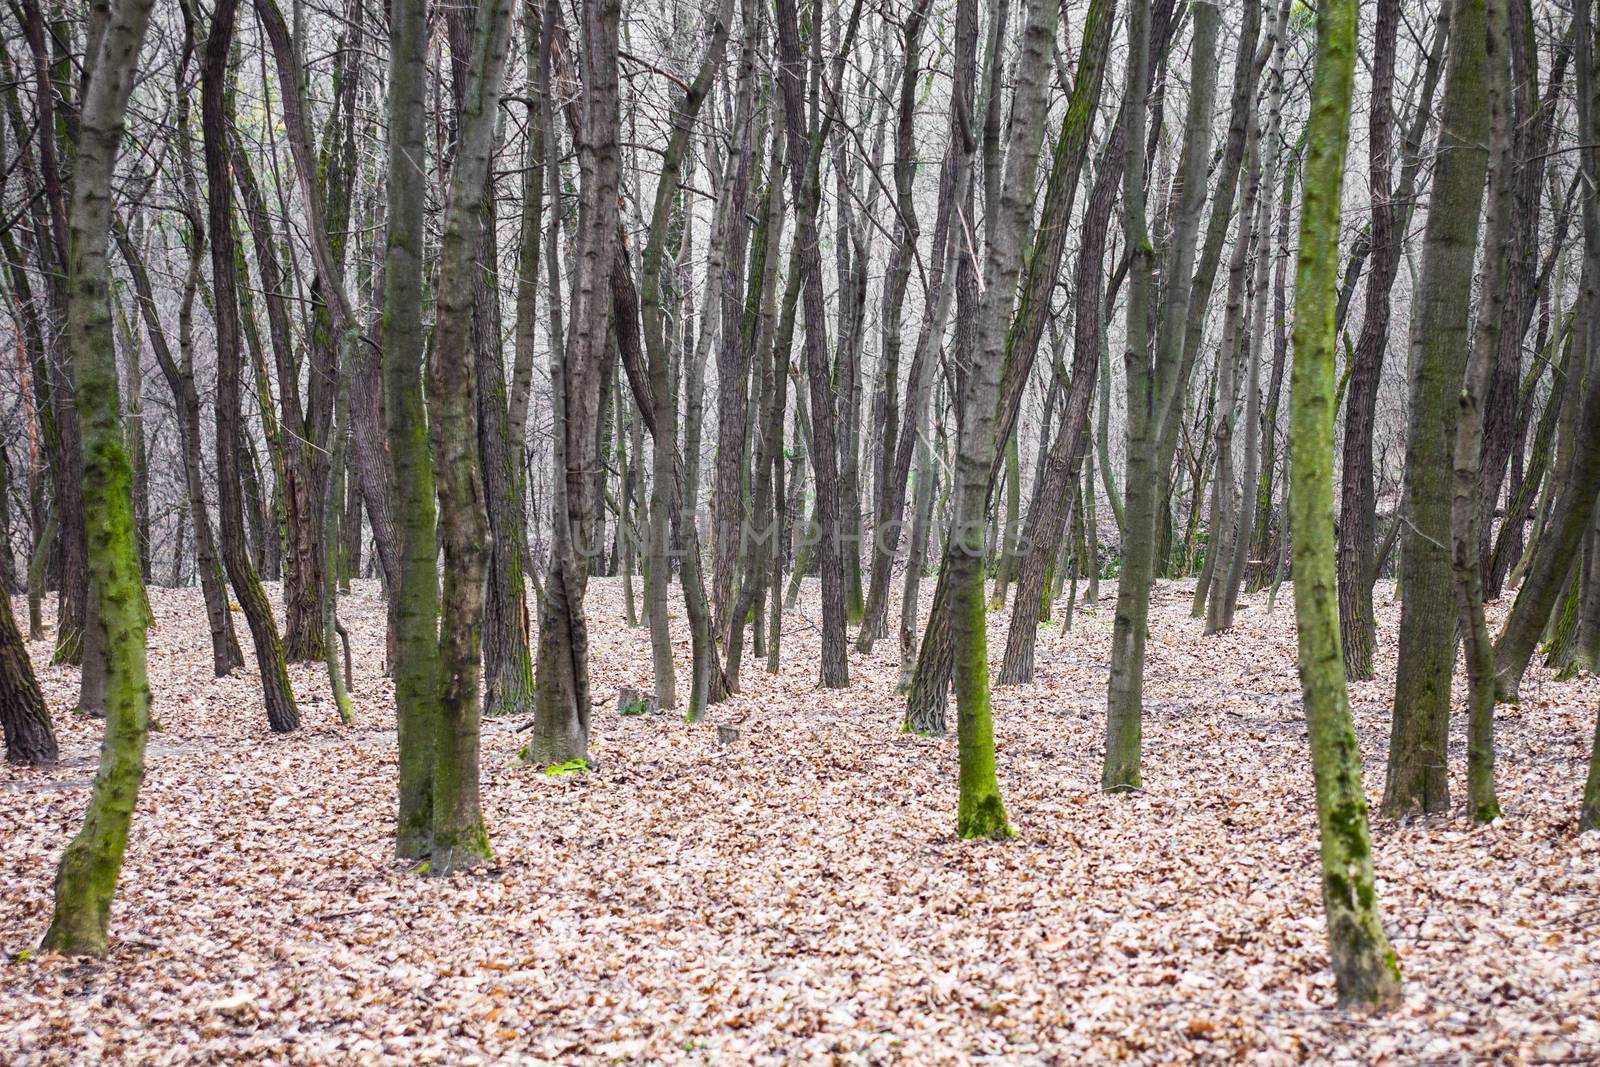 Leafless forest with moss-grown tree trunks by rootstocks